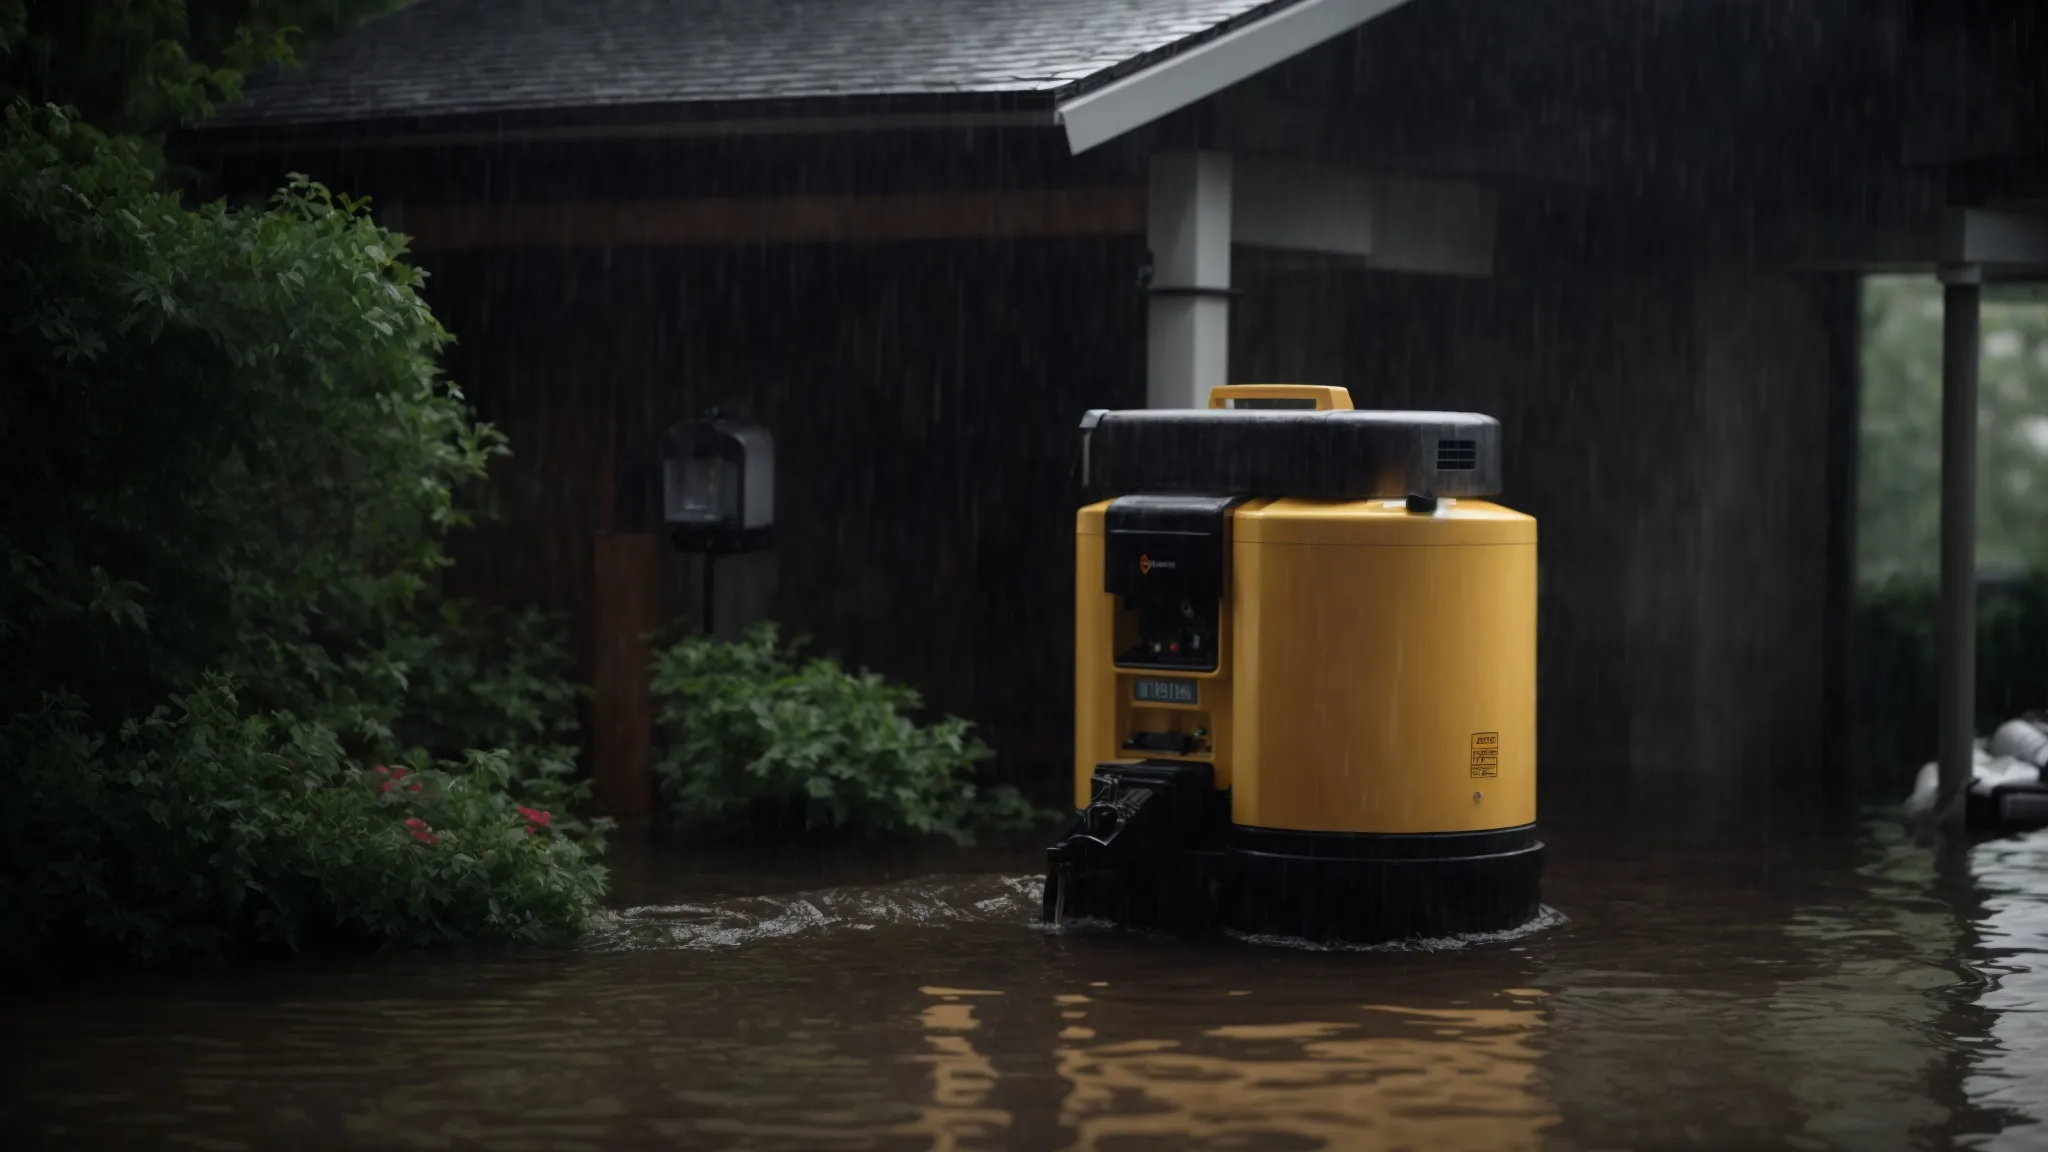 a basement sump pump with a battery backup system stands ready amidst a heavy downpour, protecting a home from flooding.